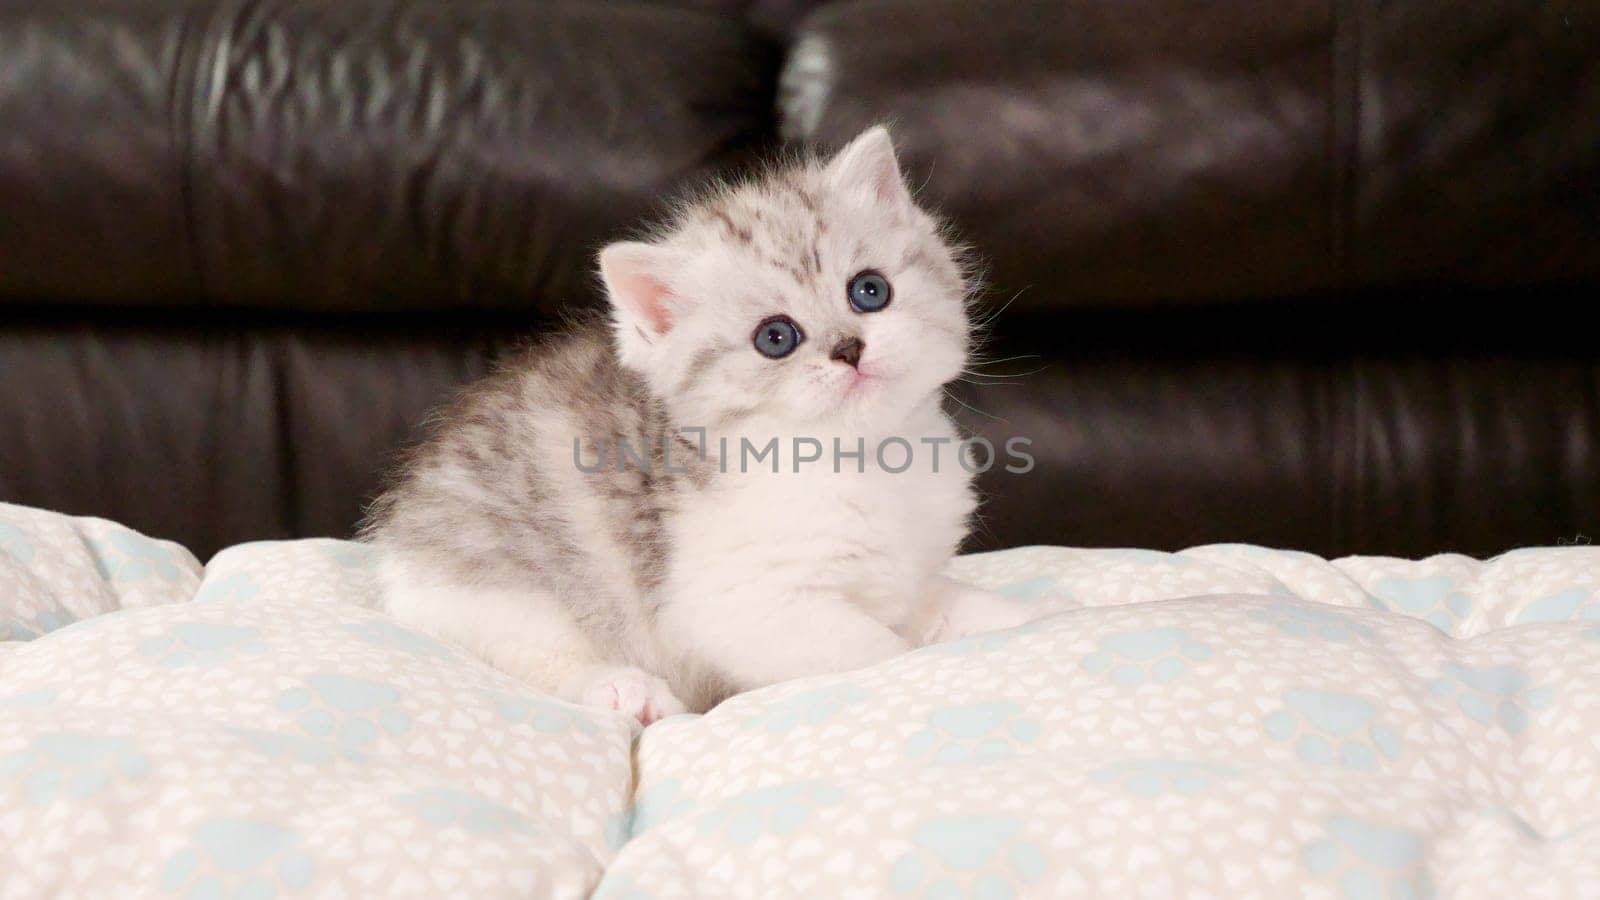 Fluffy white and tabby kitten looking at camera on brown background, front view, space for text. Cute young shorthair stripped cat with blue eyes